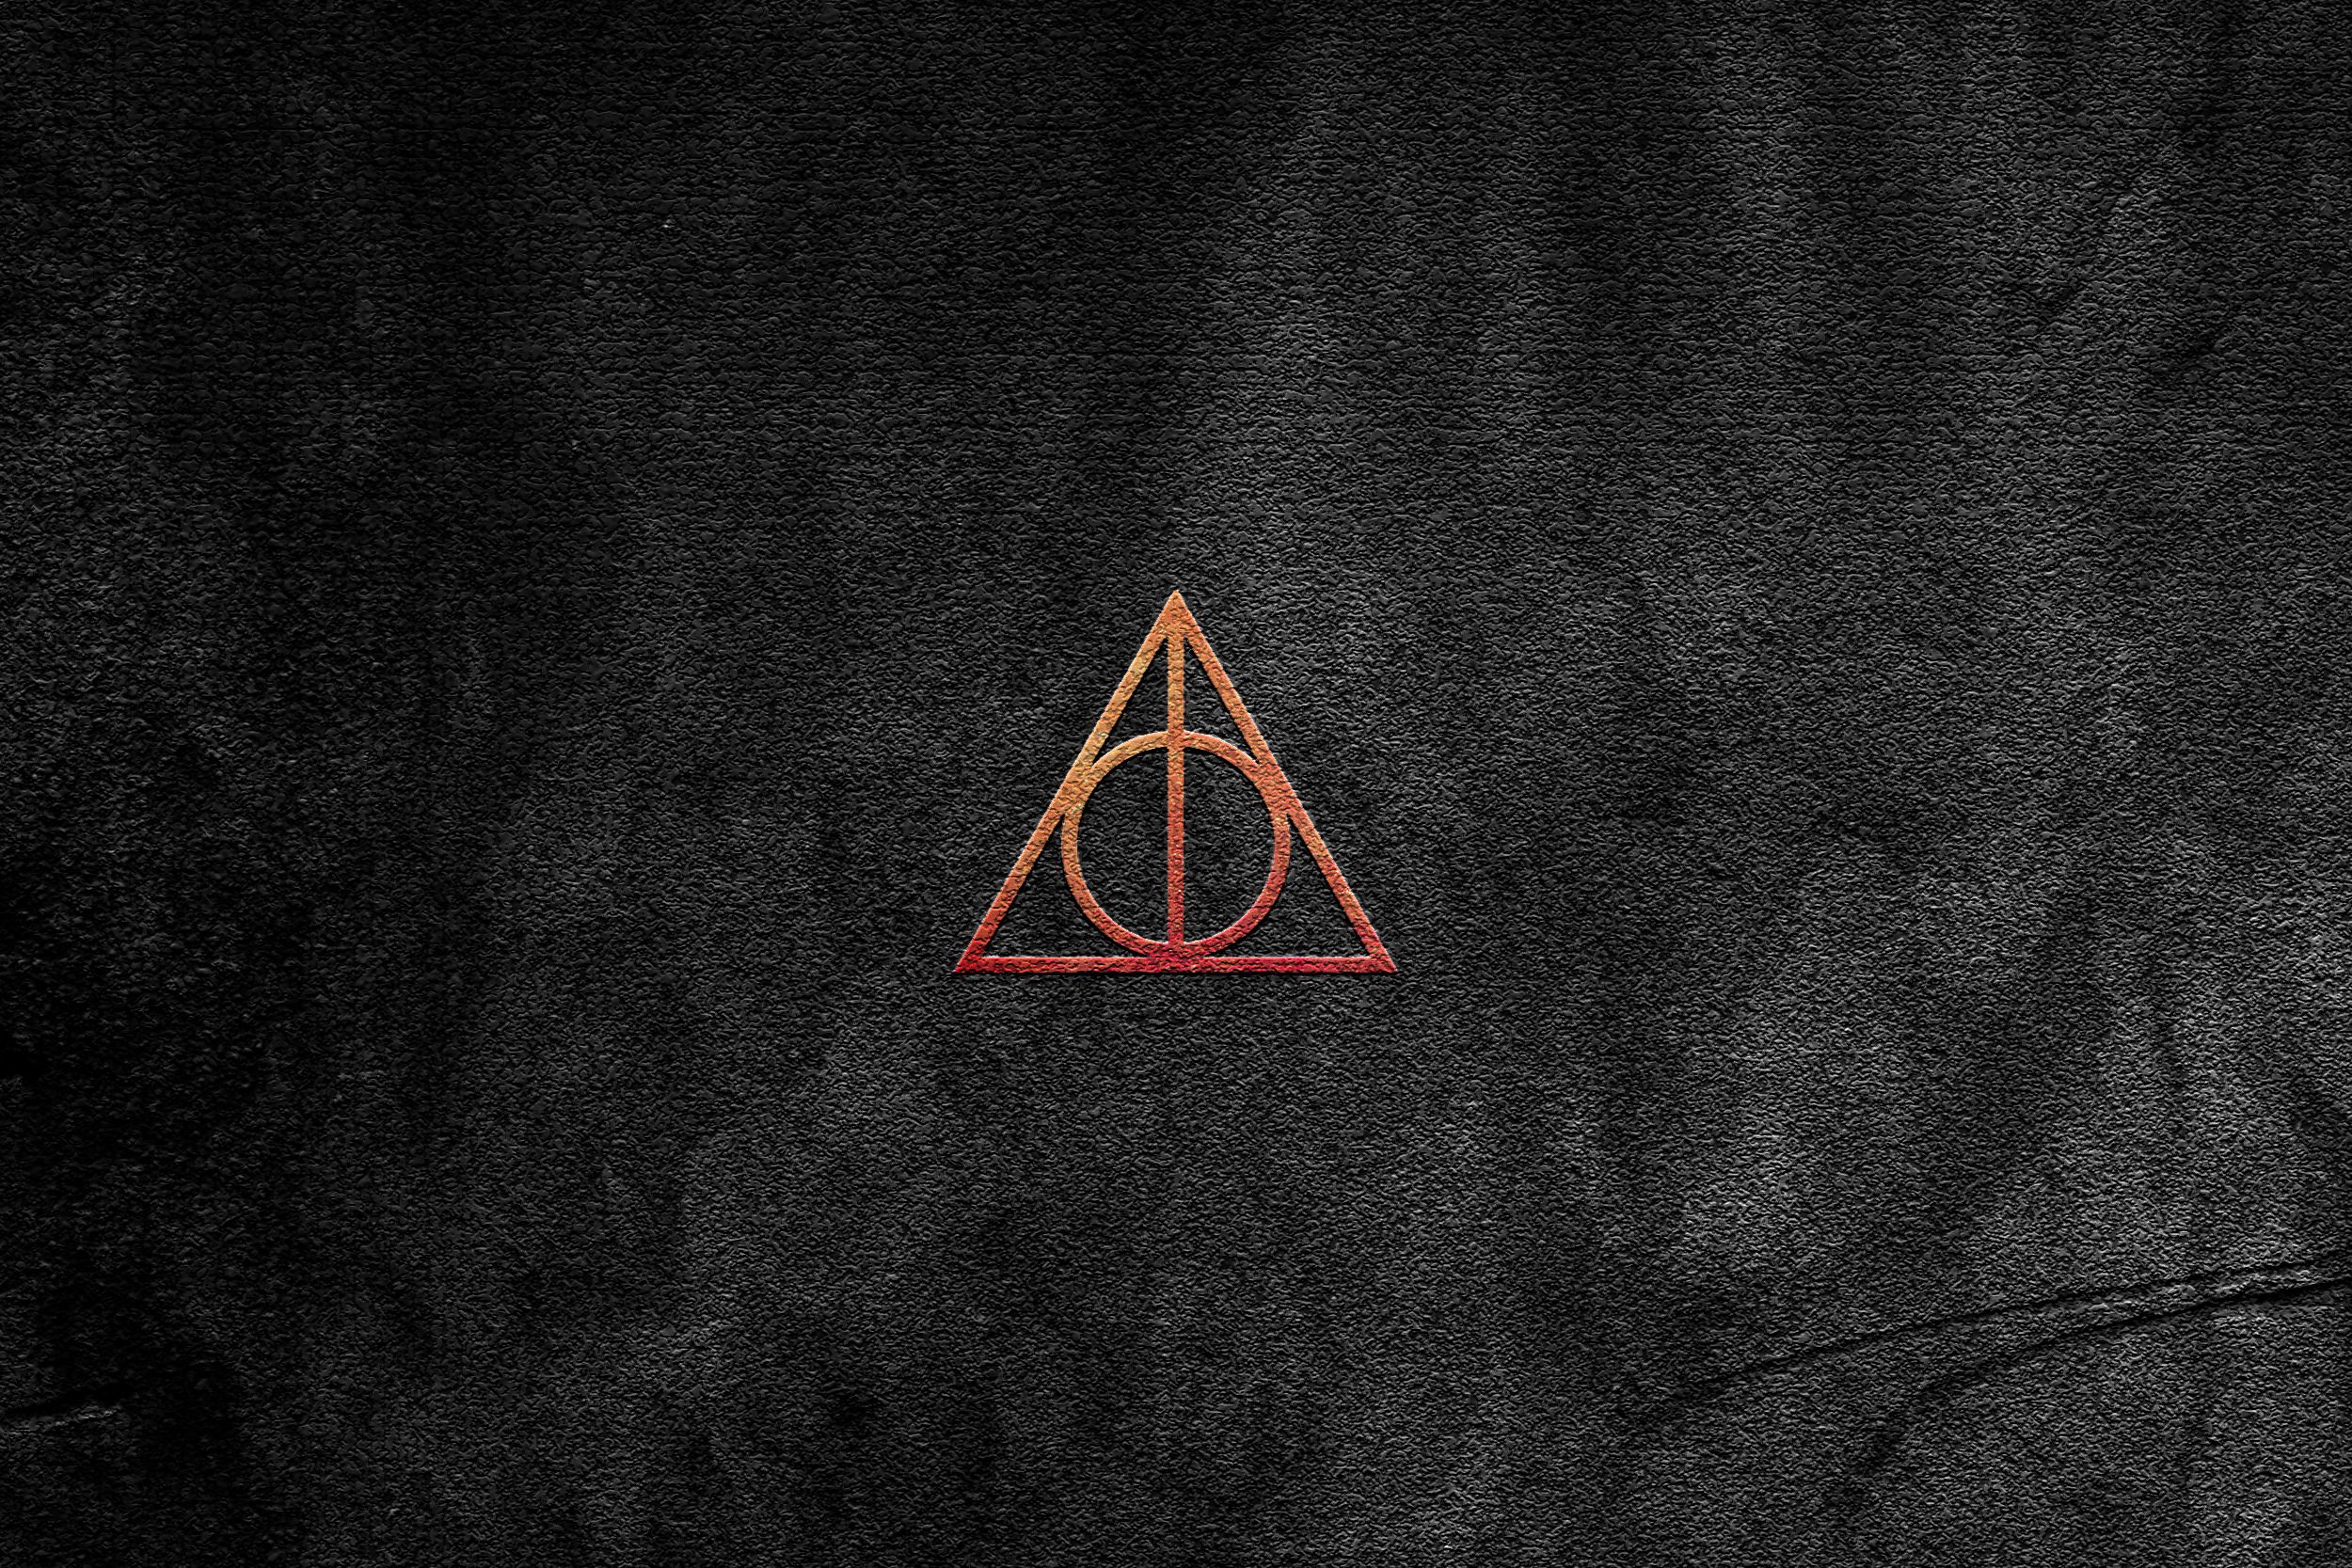 Best 55+ Deathly Hallows Wallpapers on HipWallpapers